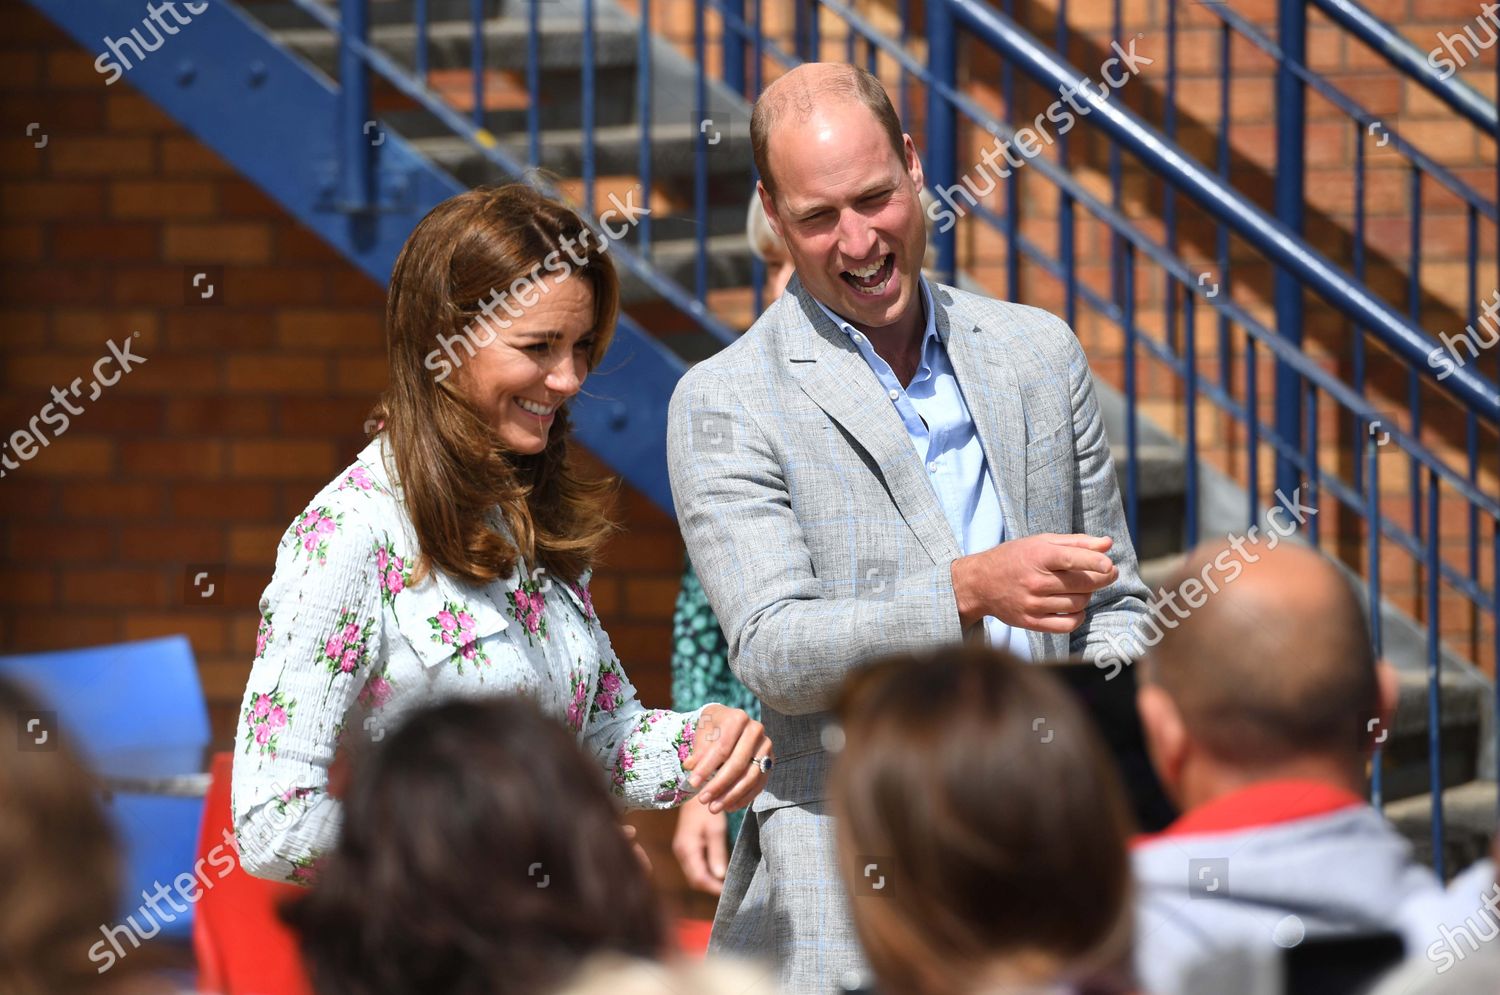 prince-william-and-catherine-duchess-of-cambridge-visit-to-barry-island-wales-uk-shutterstock-editorial-10733869n.jpg